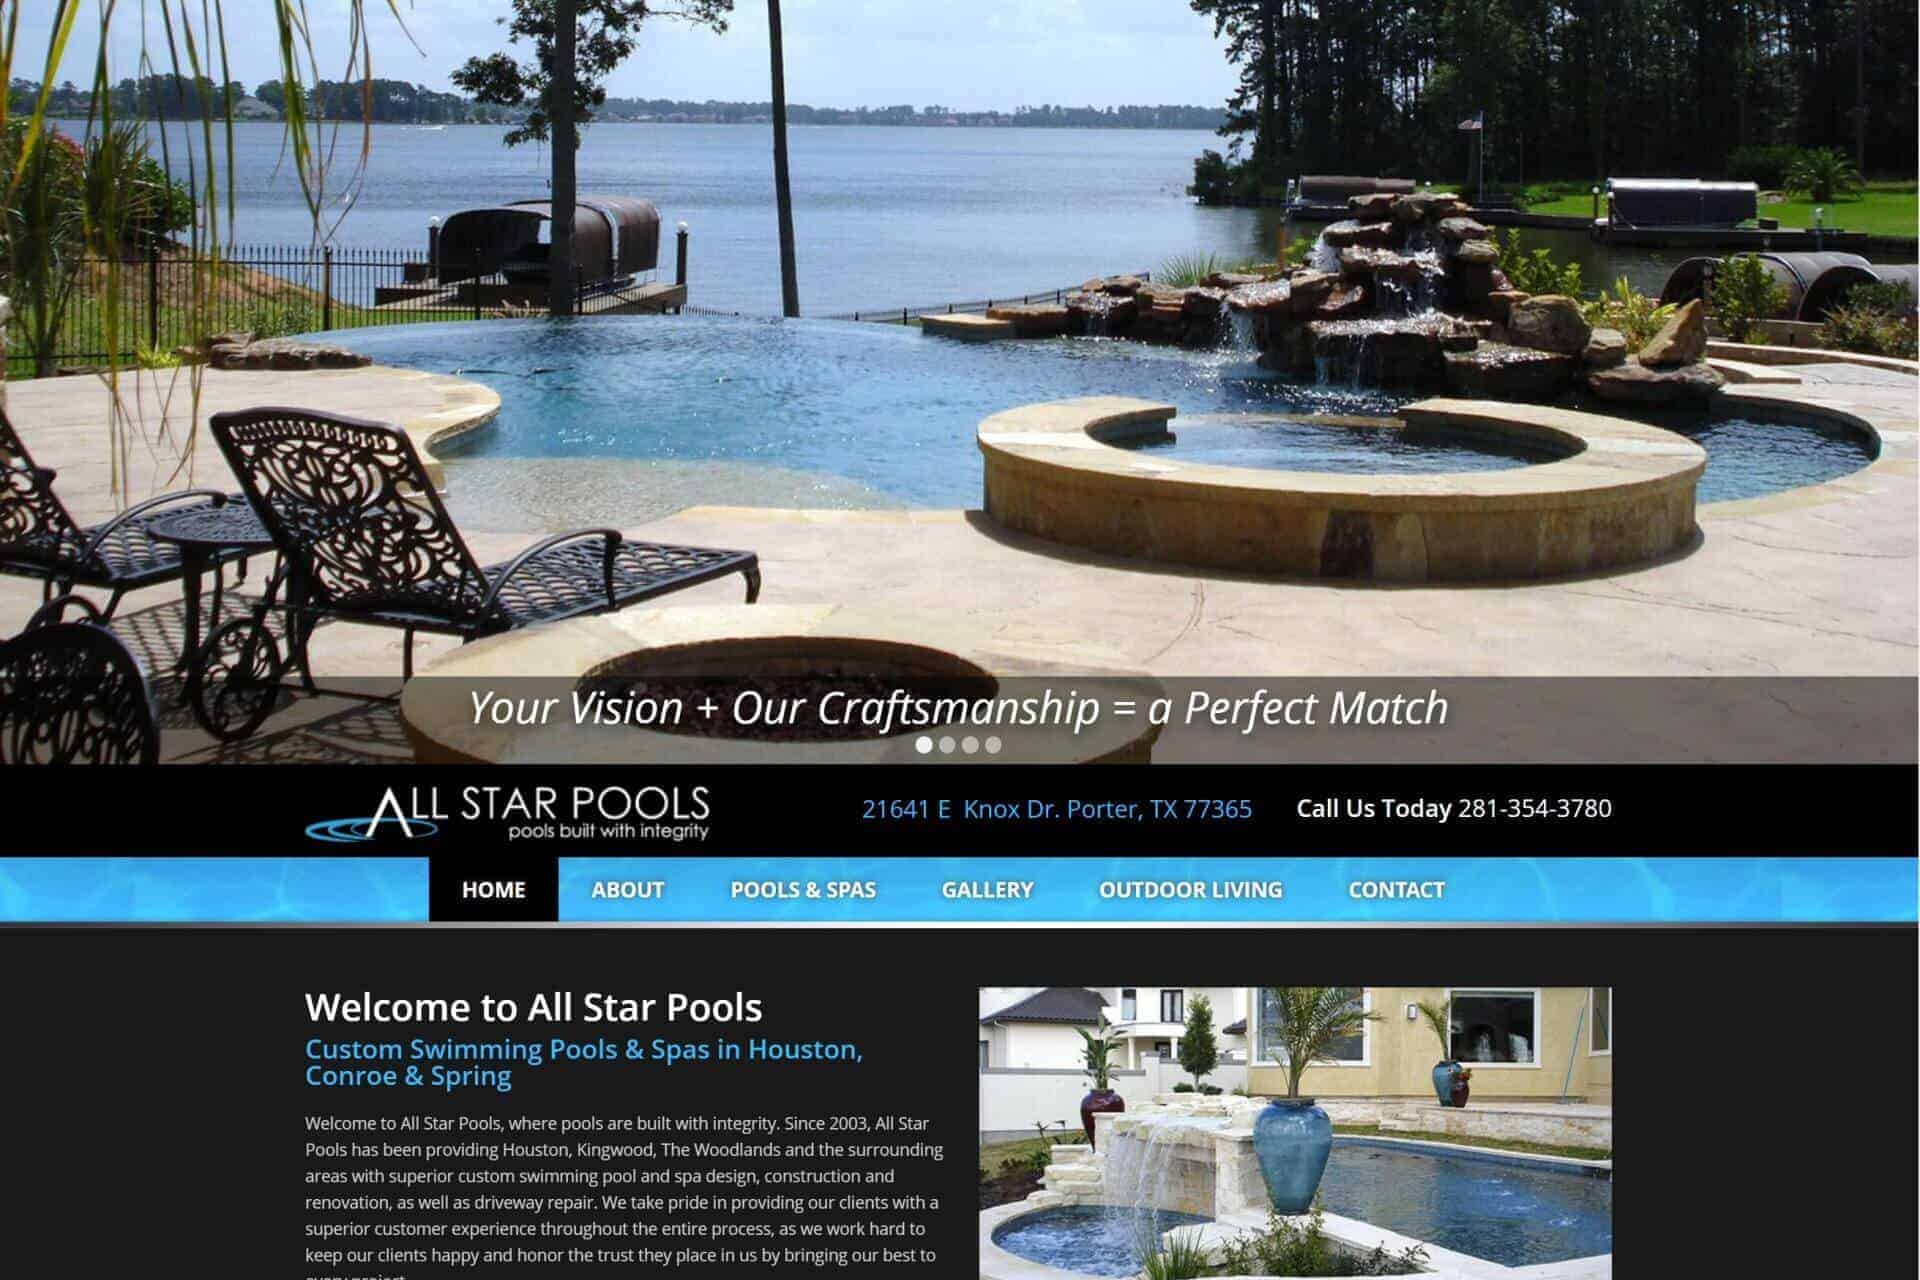 All Star Pools by Intellect Logic Systems